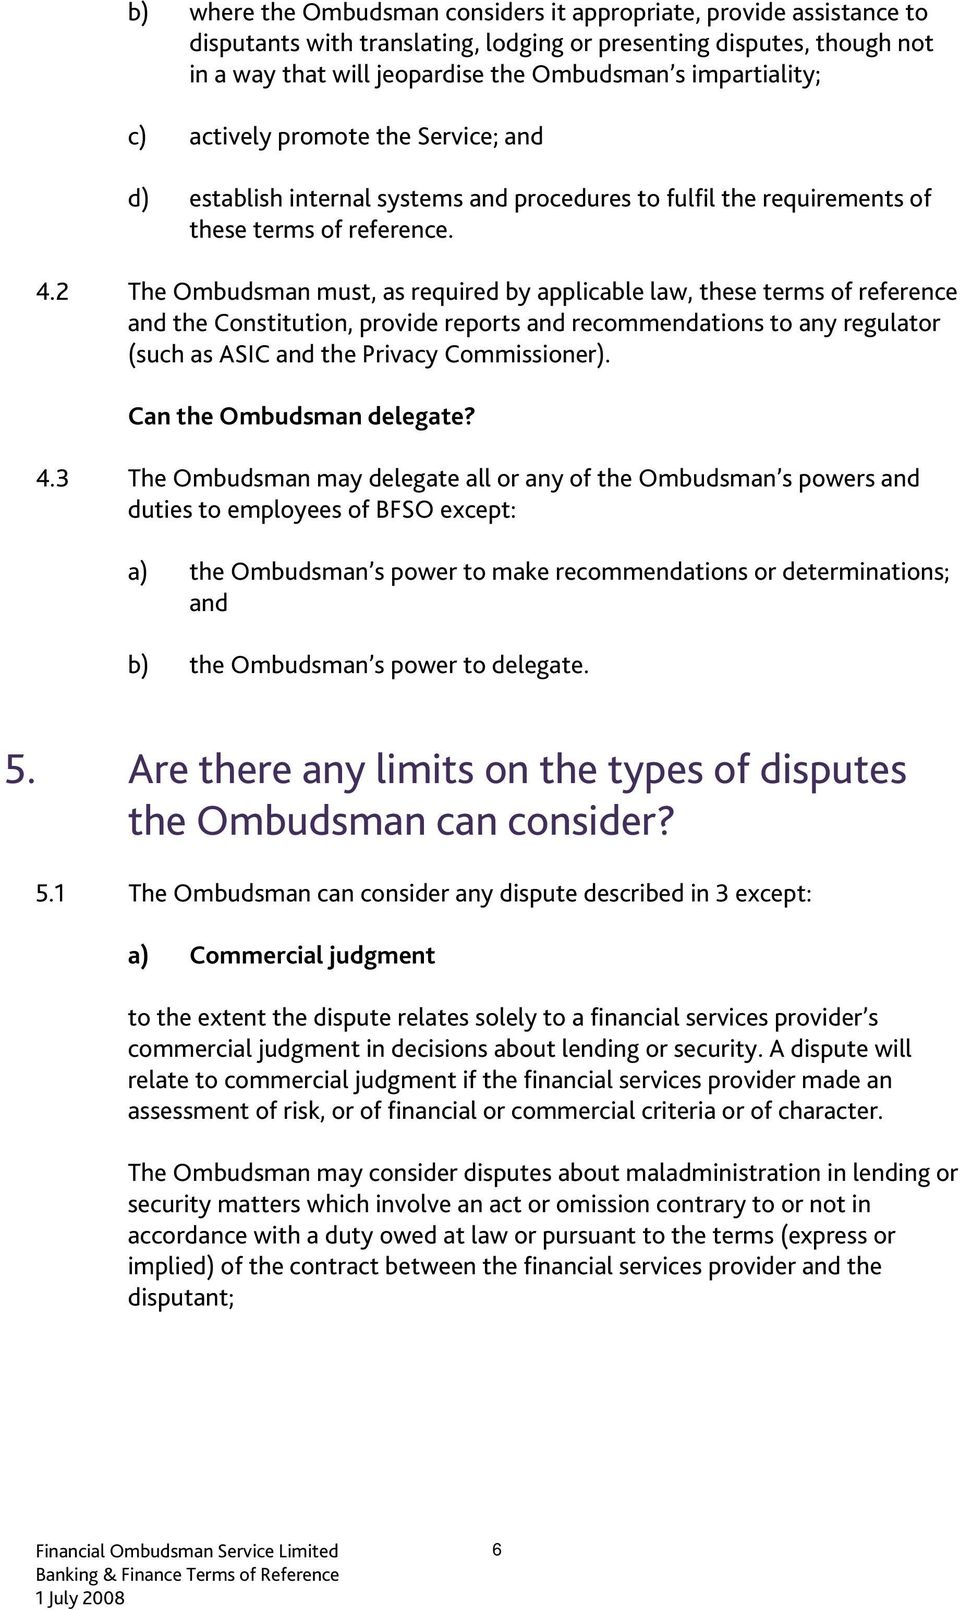 2 The Ombudsman must, as required by applicable law, these terms of reference and the Constitution, provide reports and recommendations to any regulator (such as ASIC and the Privacy Commissioner).